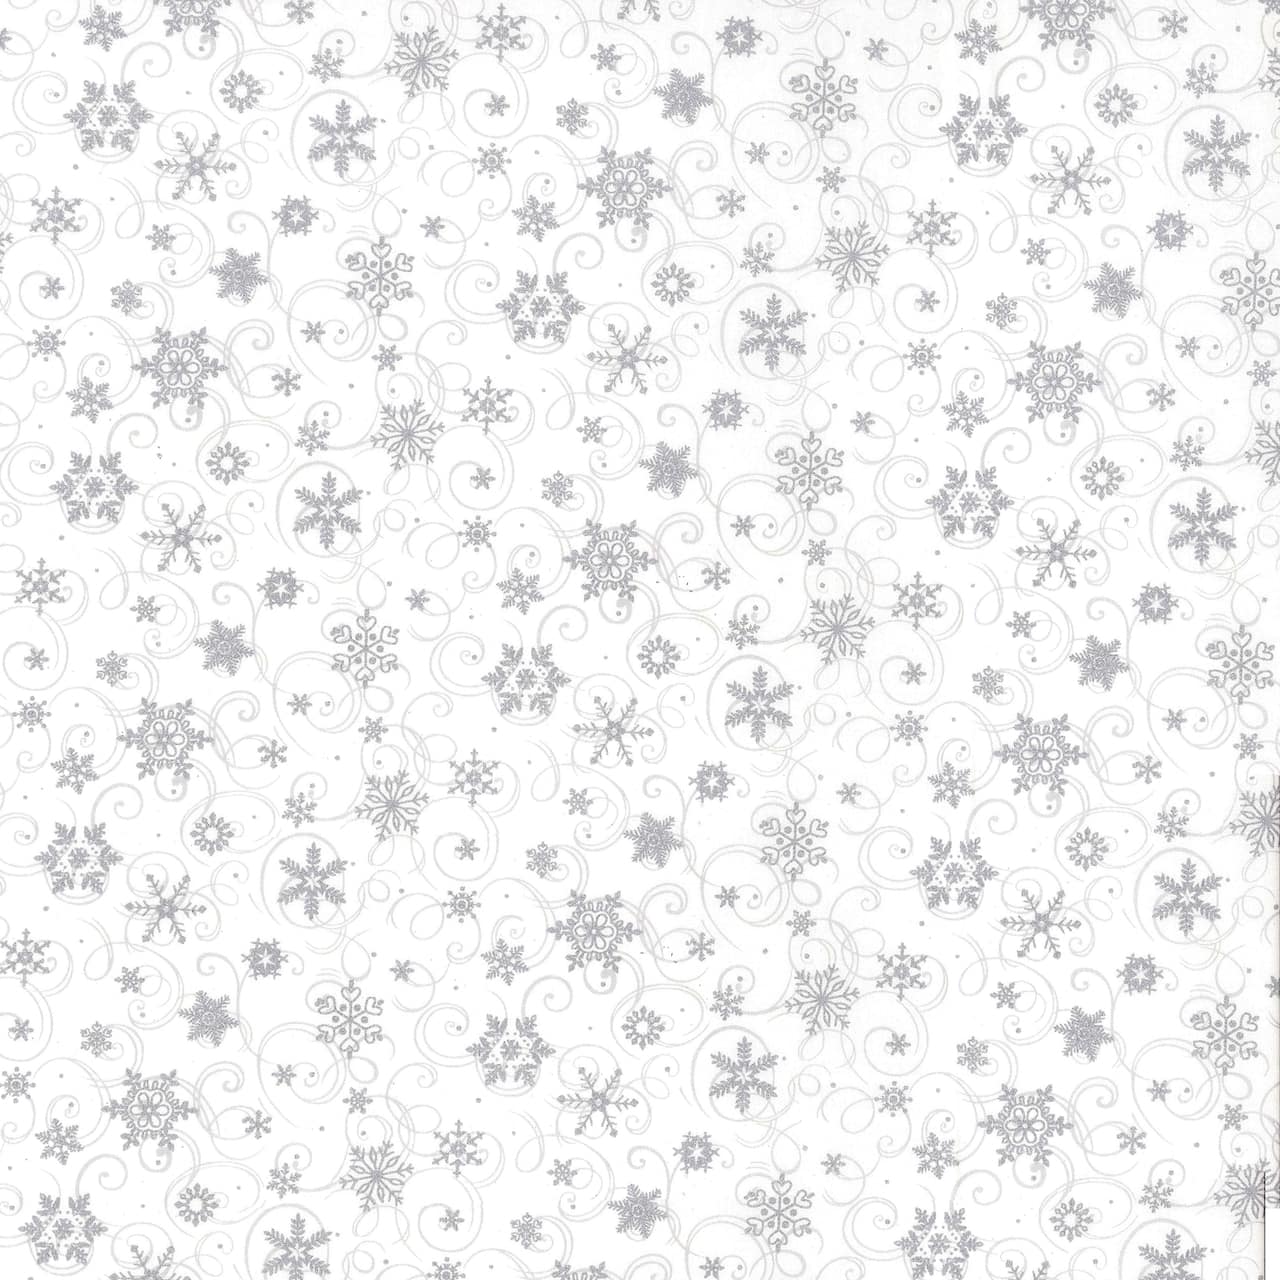 Fabric Traditions Christmas First Snowfall White Glitter Cotton Fabric